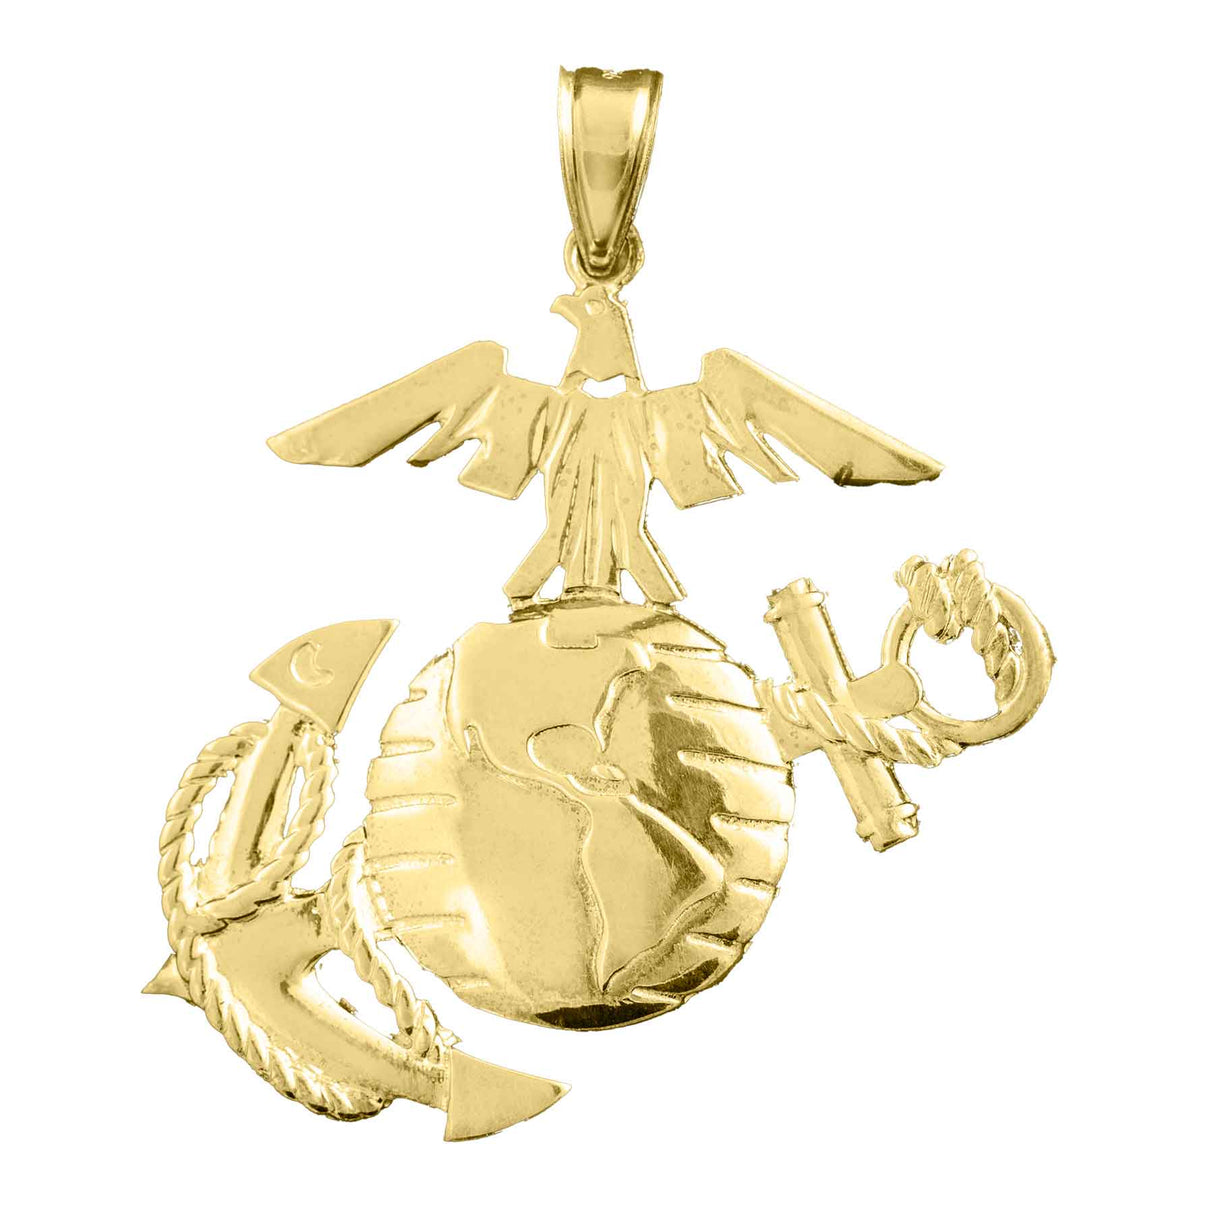 2" Eagle, Globe, and Anchor Pendant - 10k Gold - SGT GRIT